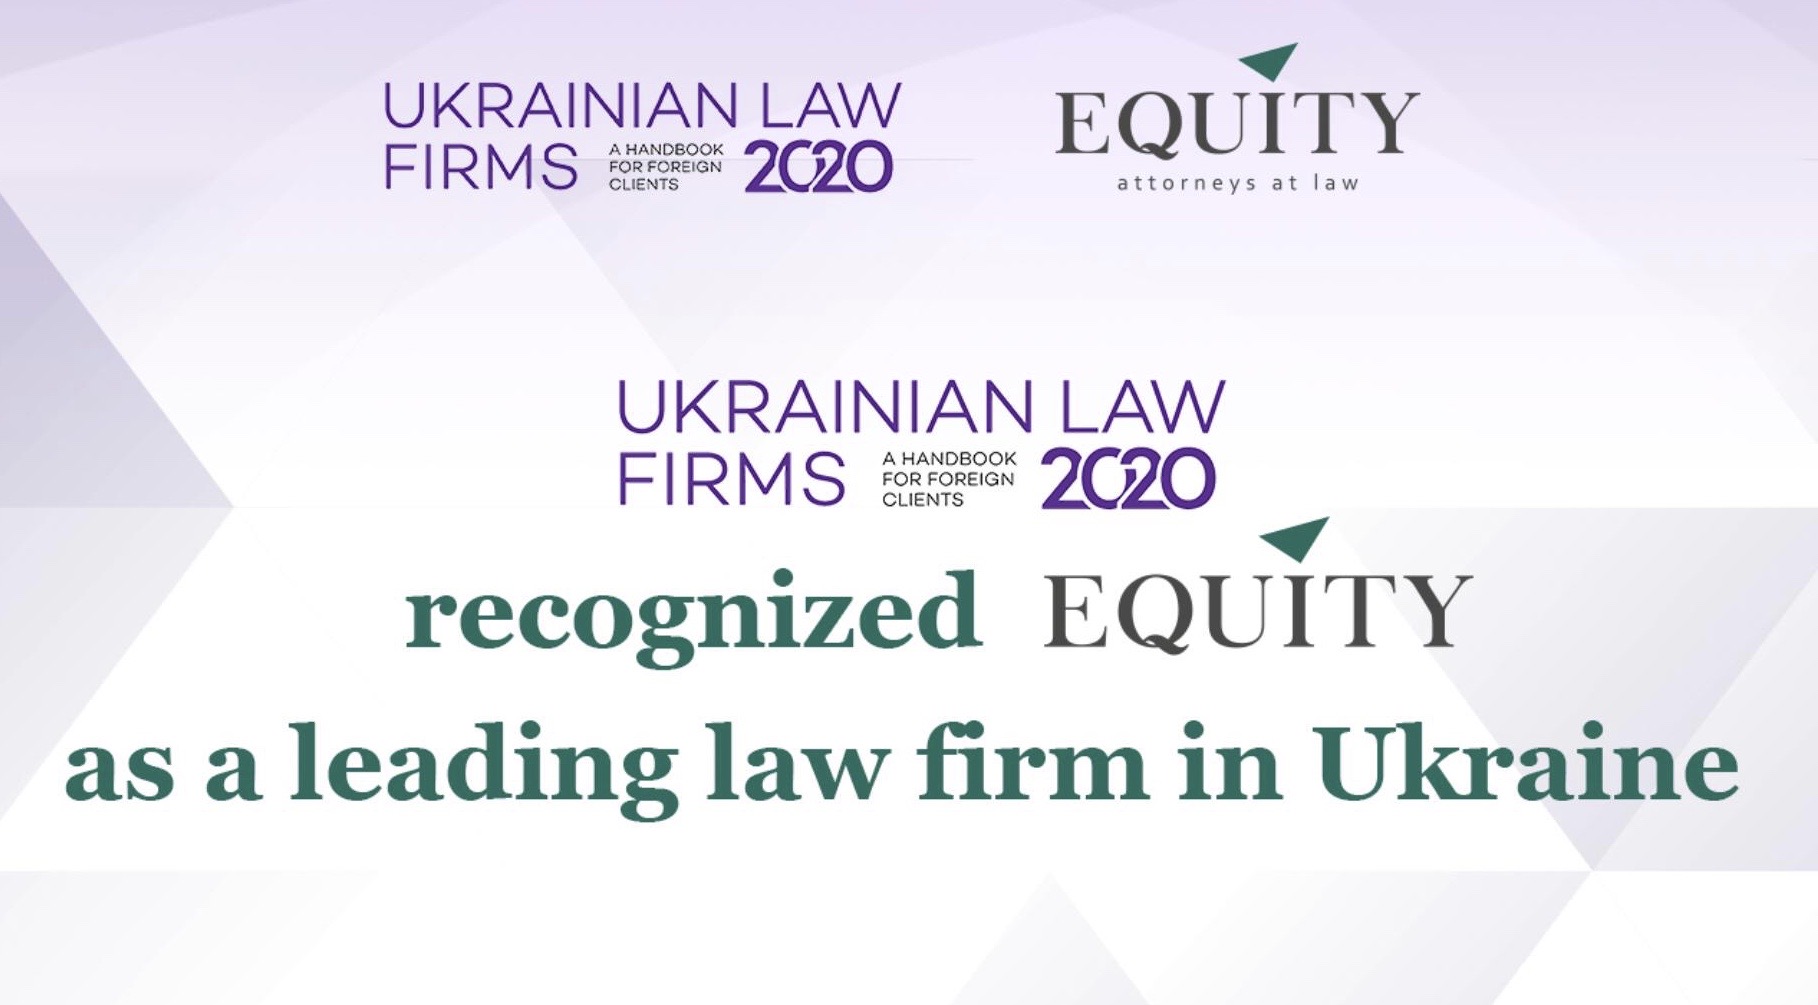 EQUITY awarded by Ukrainian Law Firms 2020: a Handbook For Foreign Clients directory